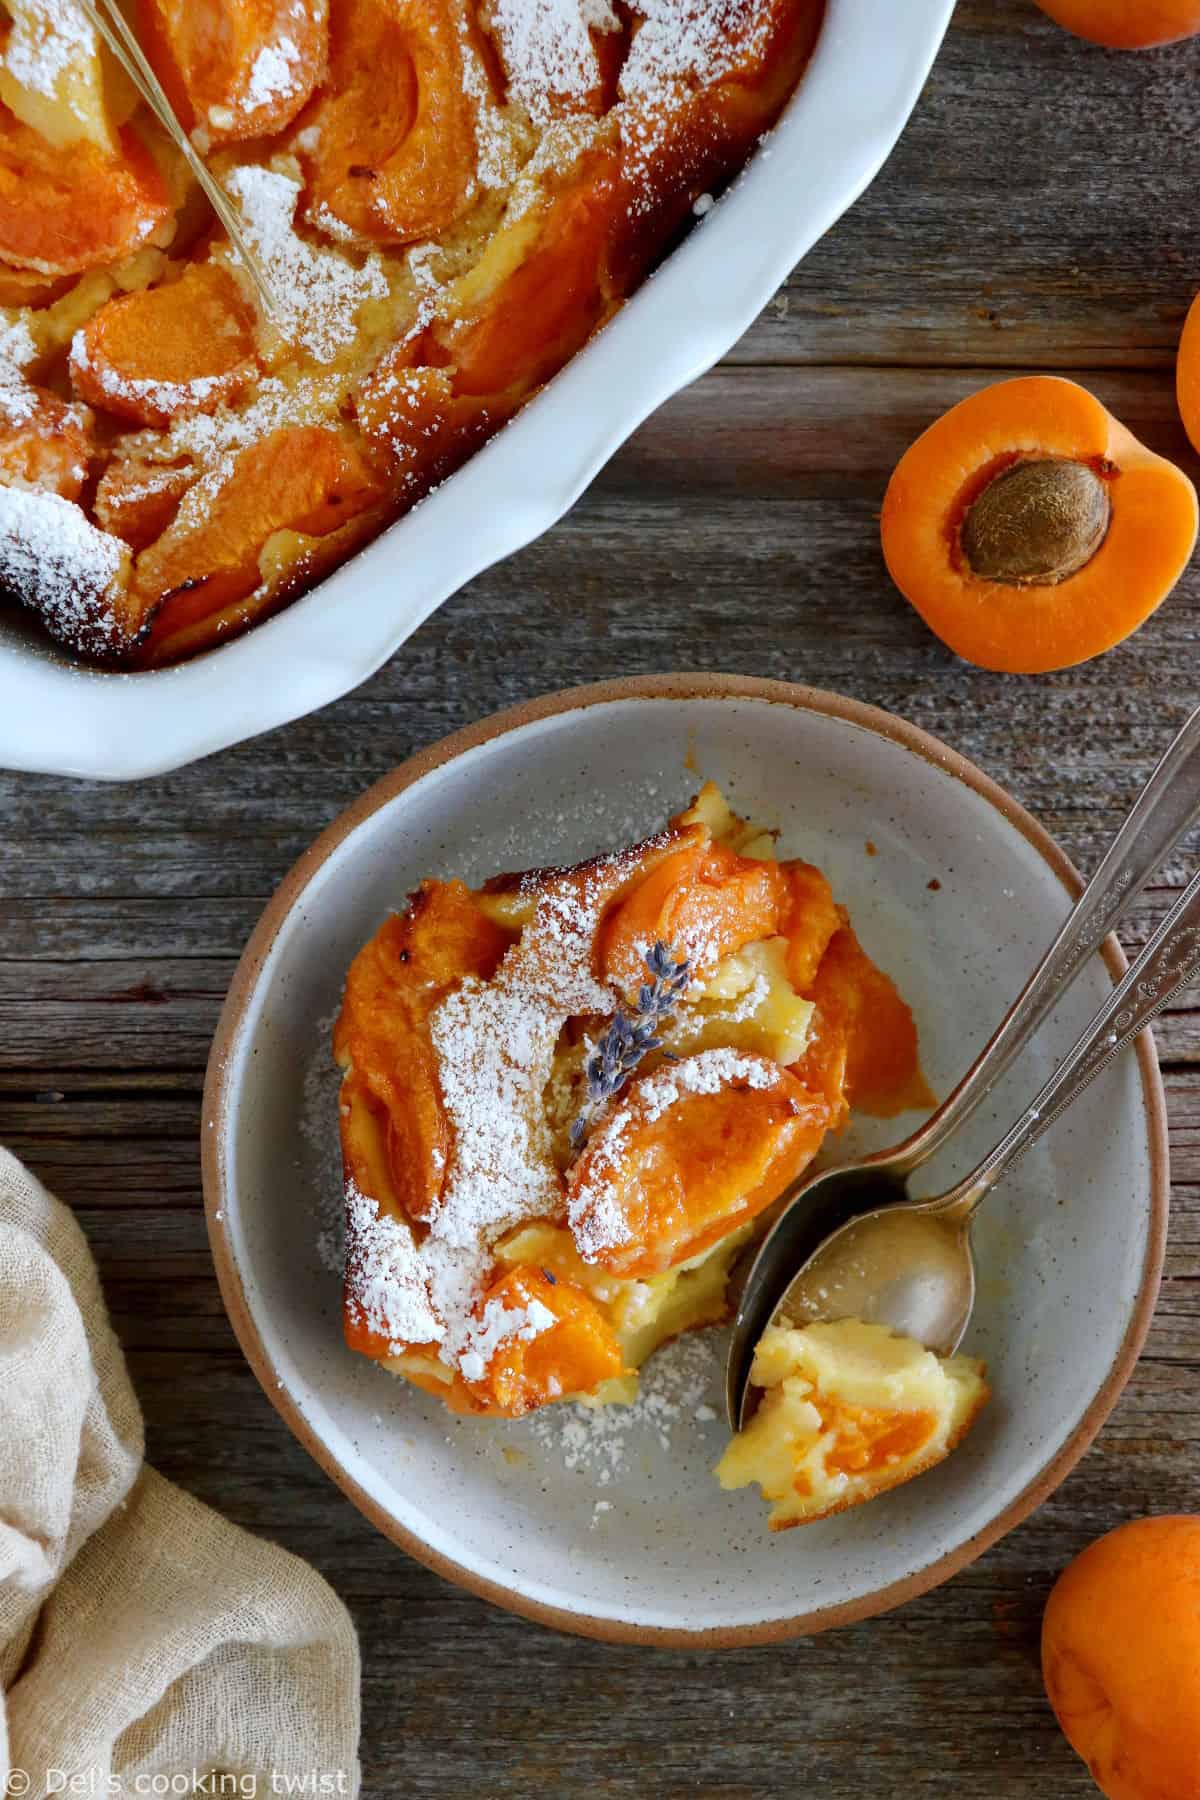 Apricot clafoutis is a timeless French dessert, consisting of a simple creamy custard base filled with fresh apricots.